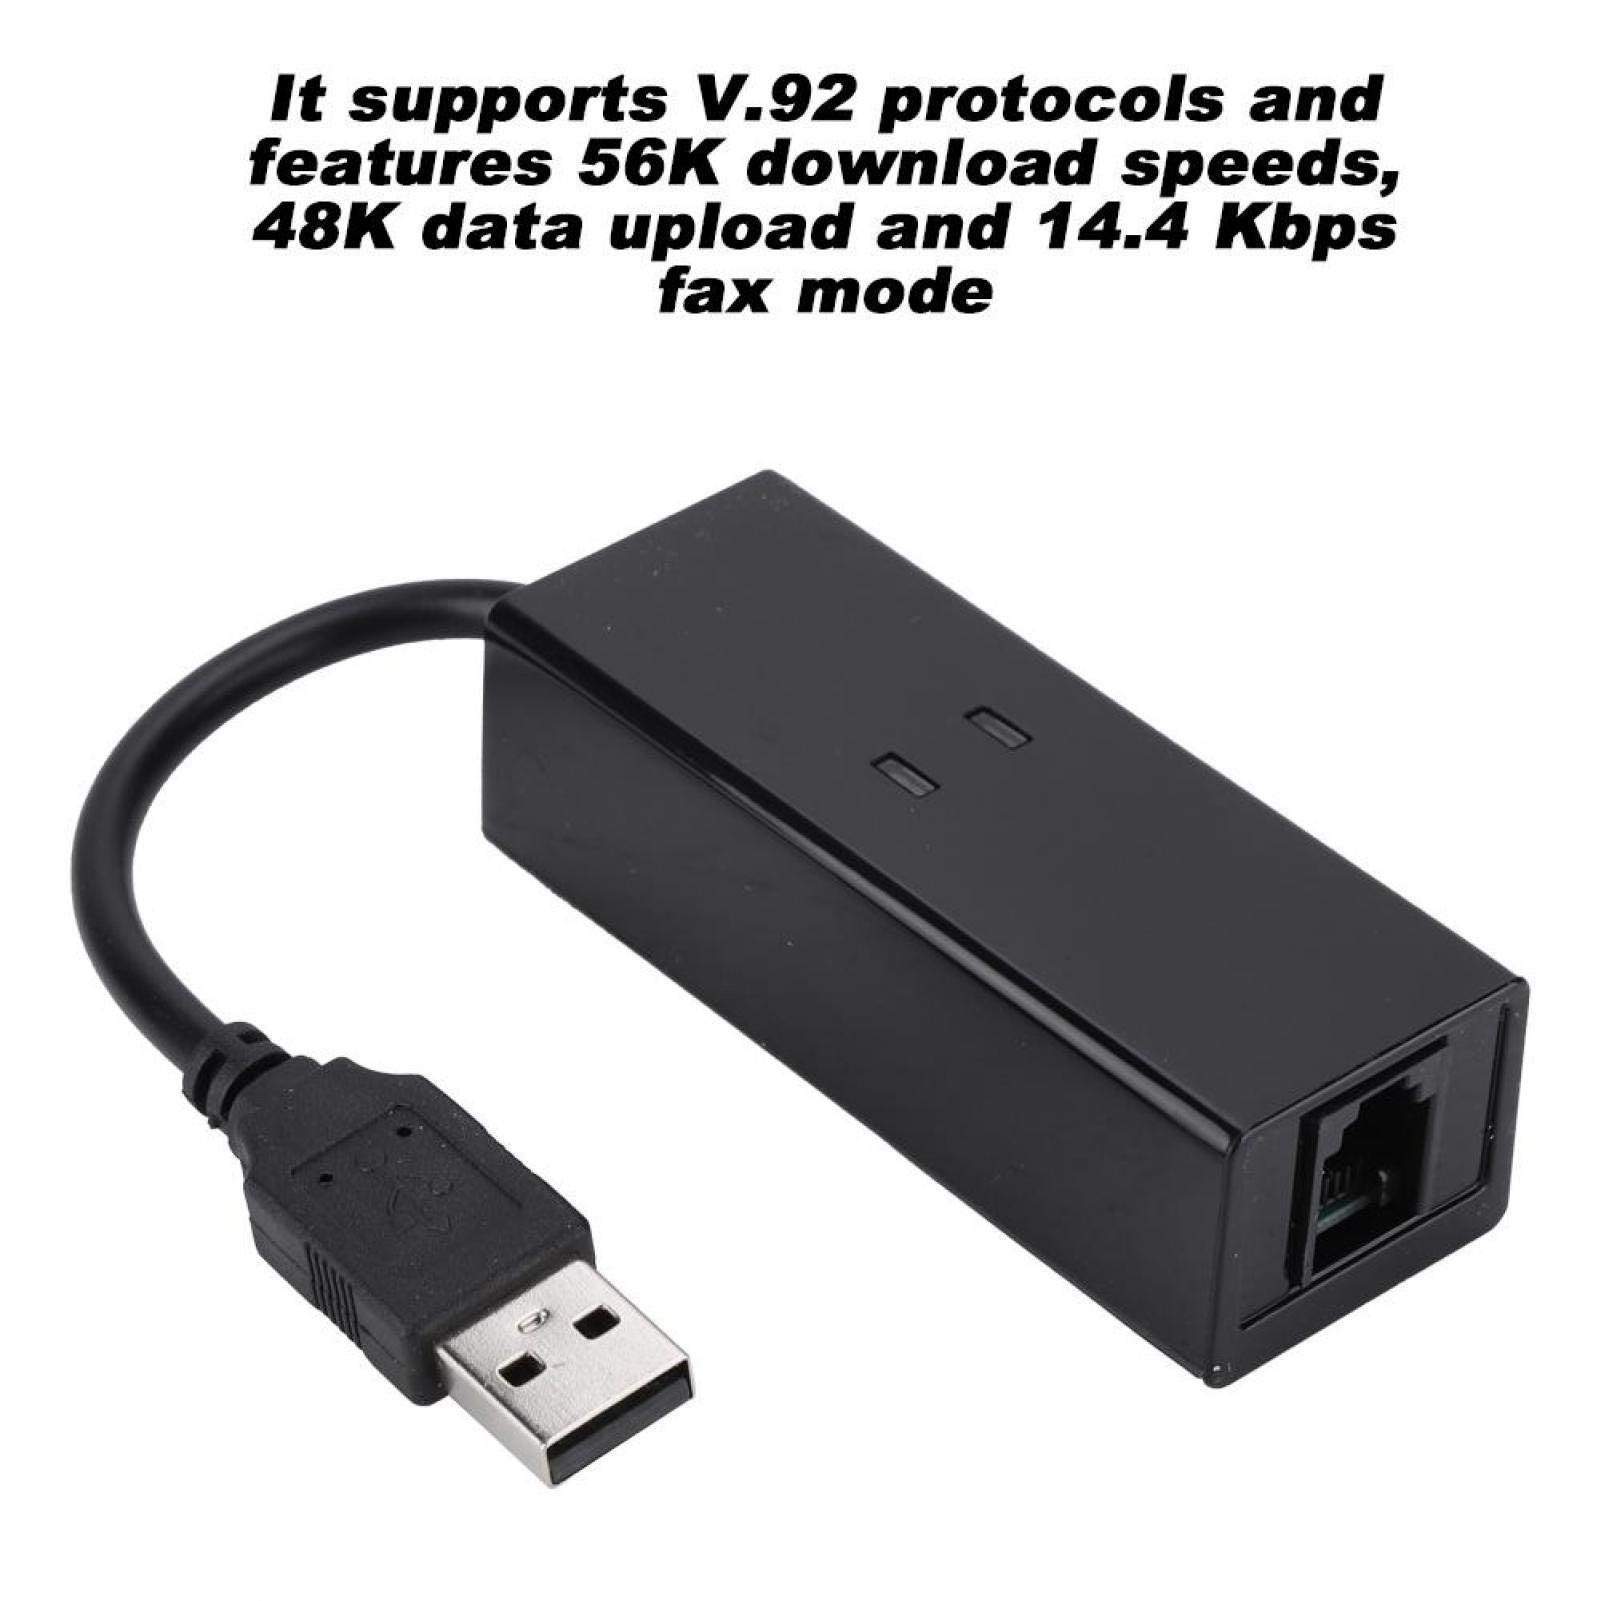 Vipxyc Data Modem, USB 2.0 External Dial Up Voice Fax Data Modem Fit 56K Download Speeds Supports Caller ID for Win7 Win8 Win10 XP